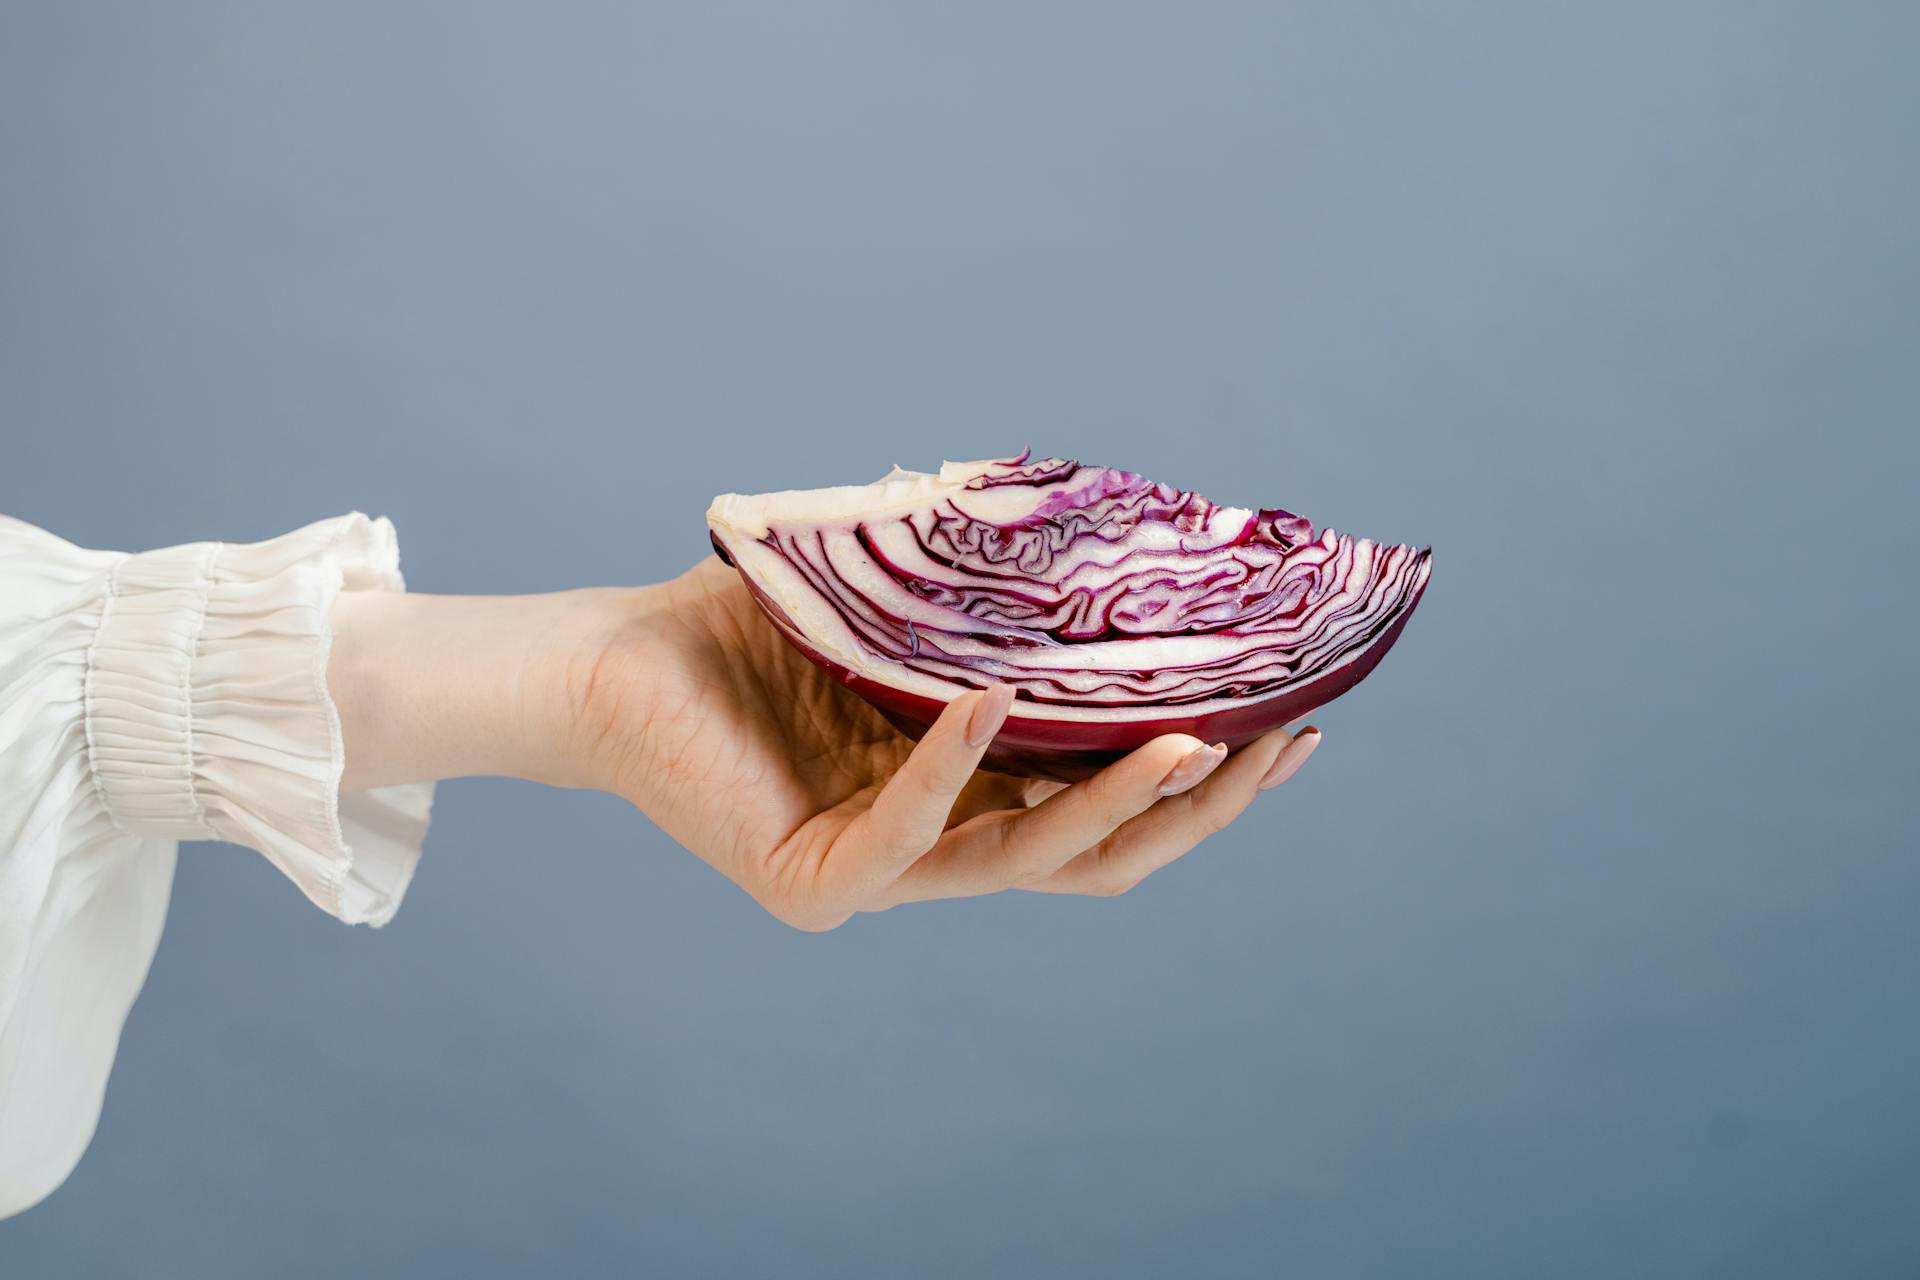 A person holding a red cabbage | Source: Pexels